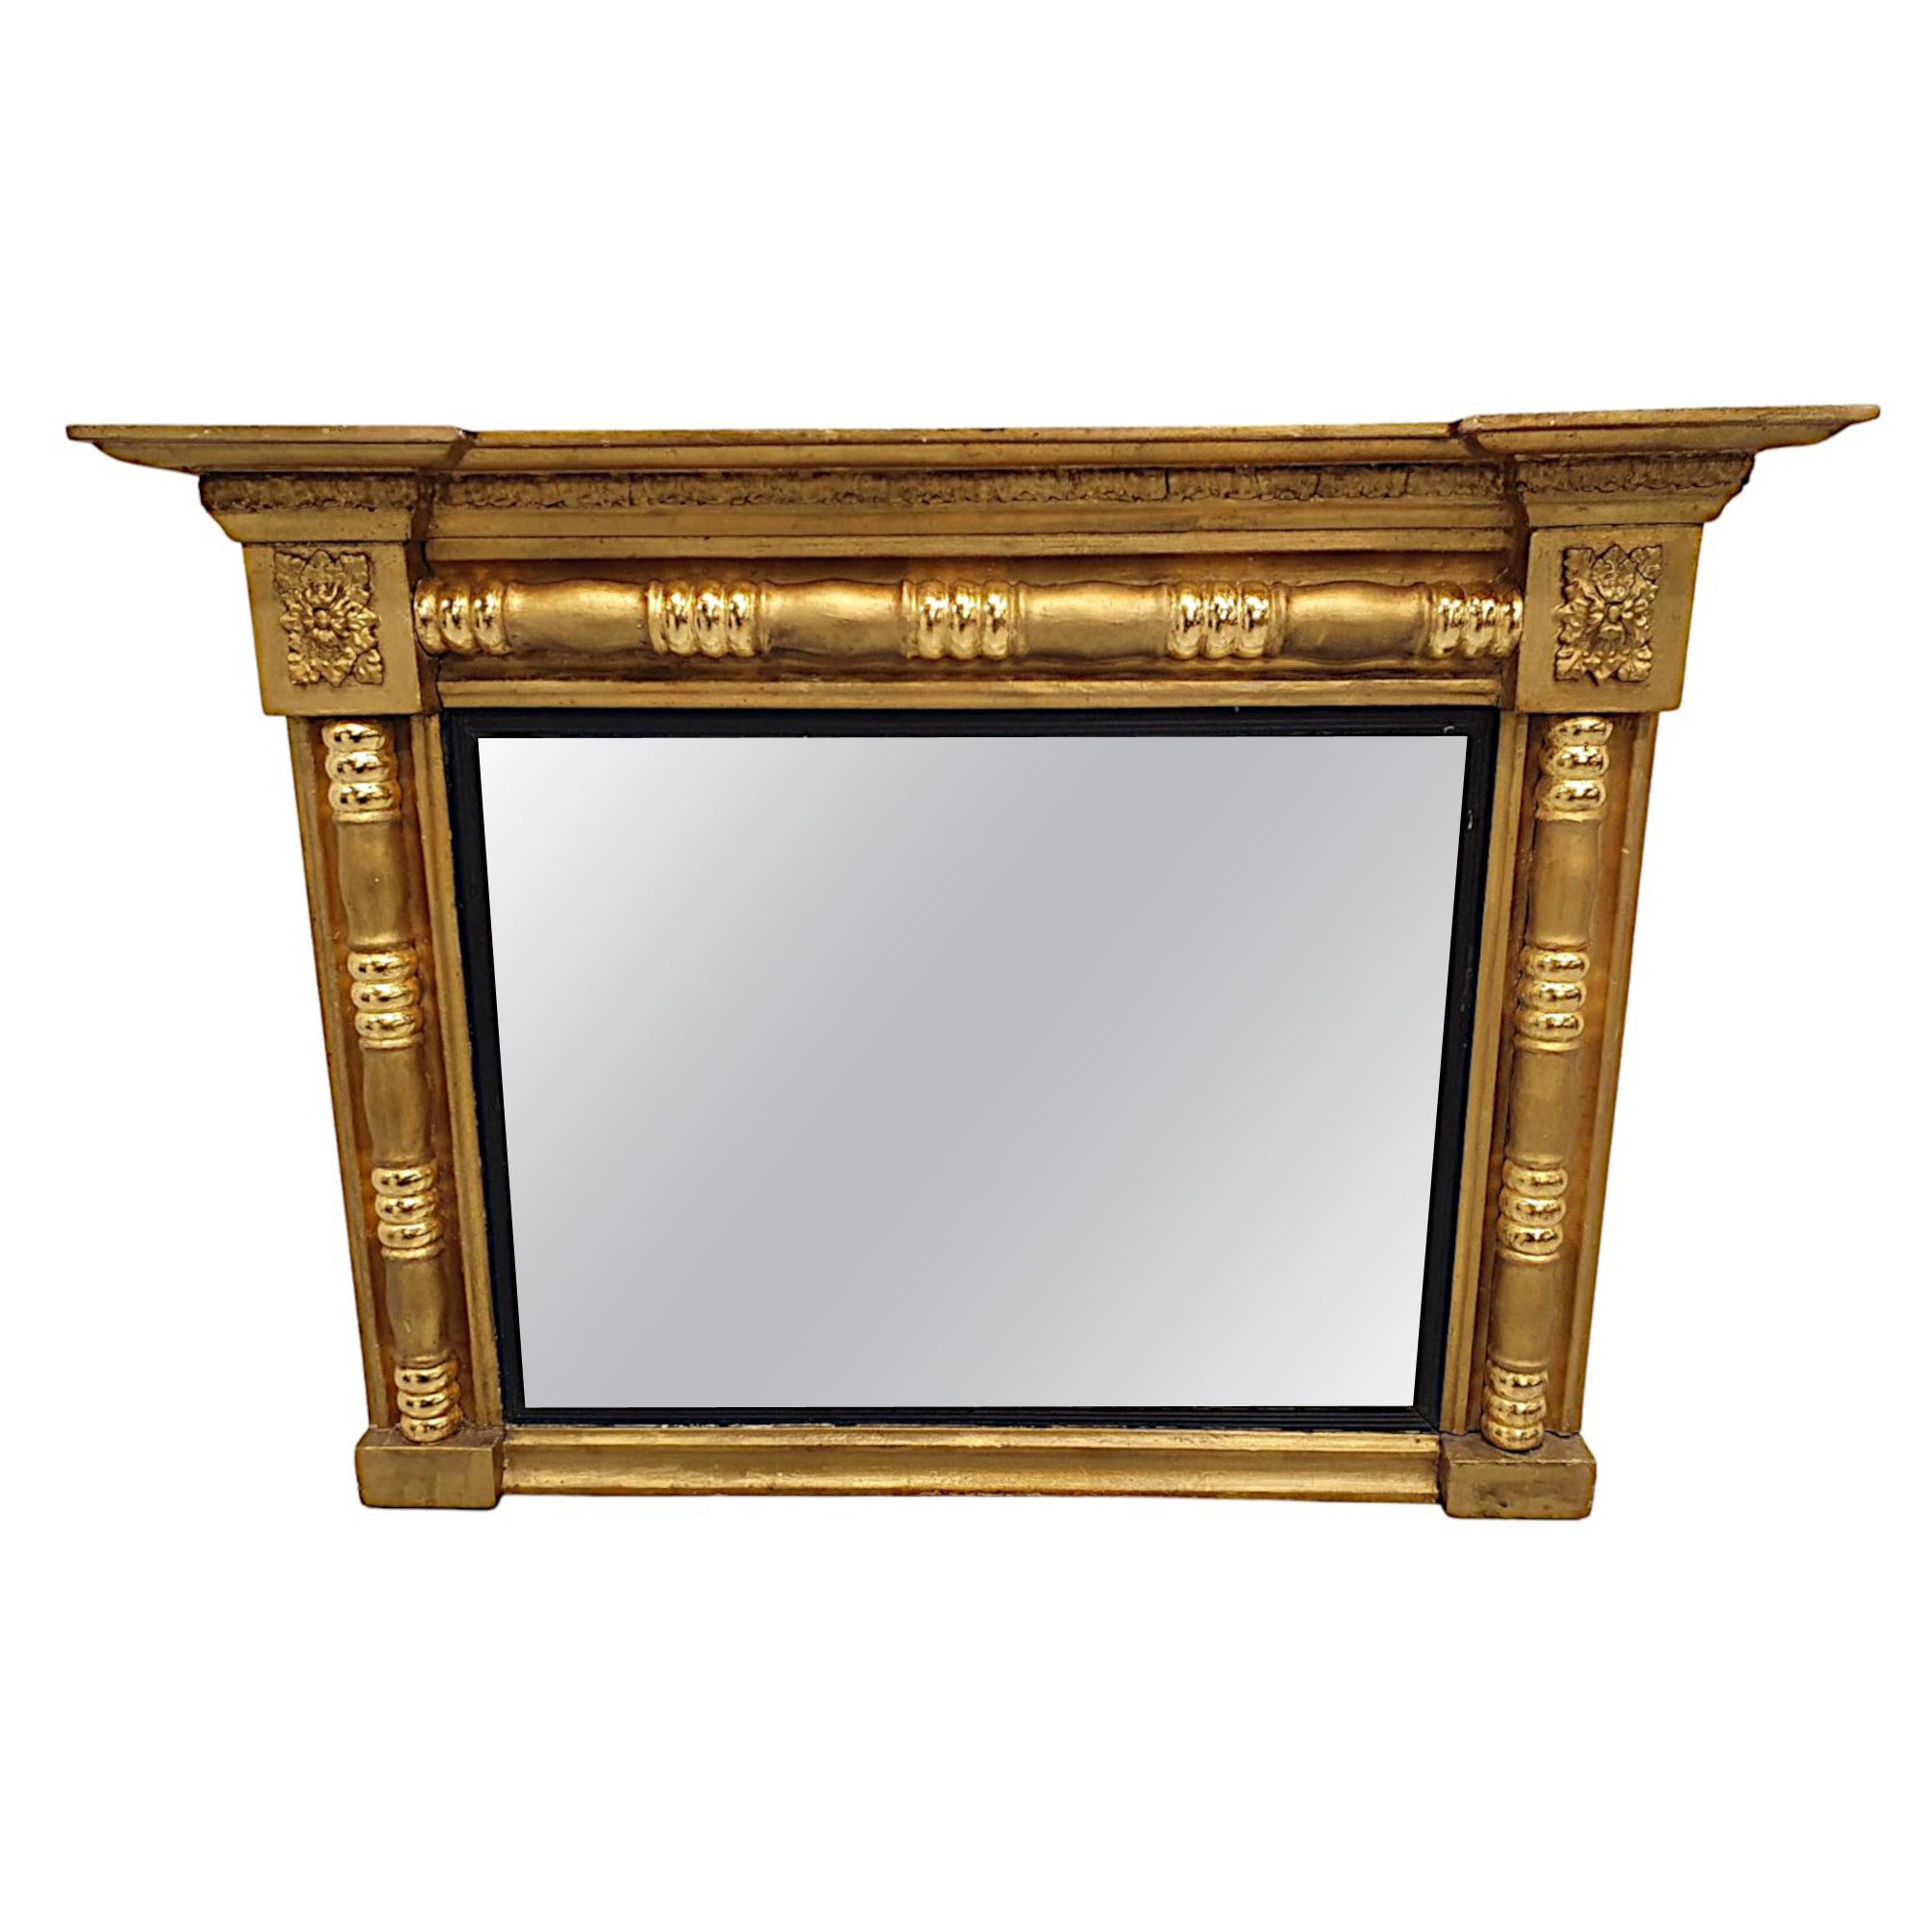 Gorgeous Early 19th Century Giltwood Mirror